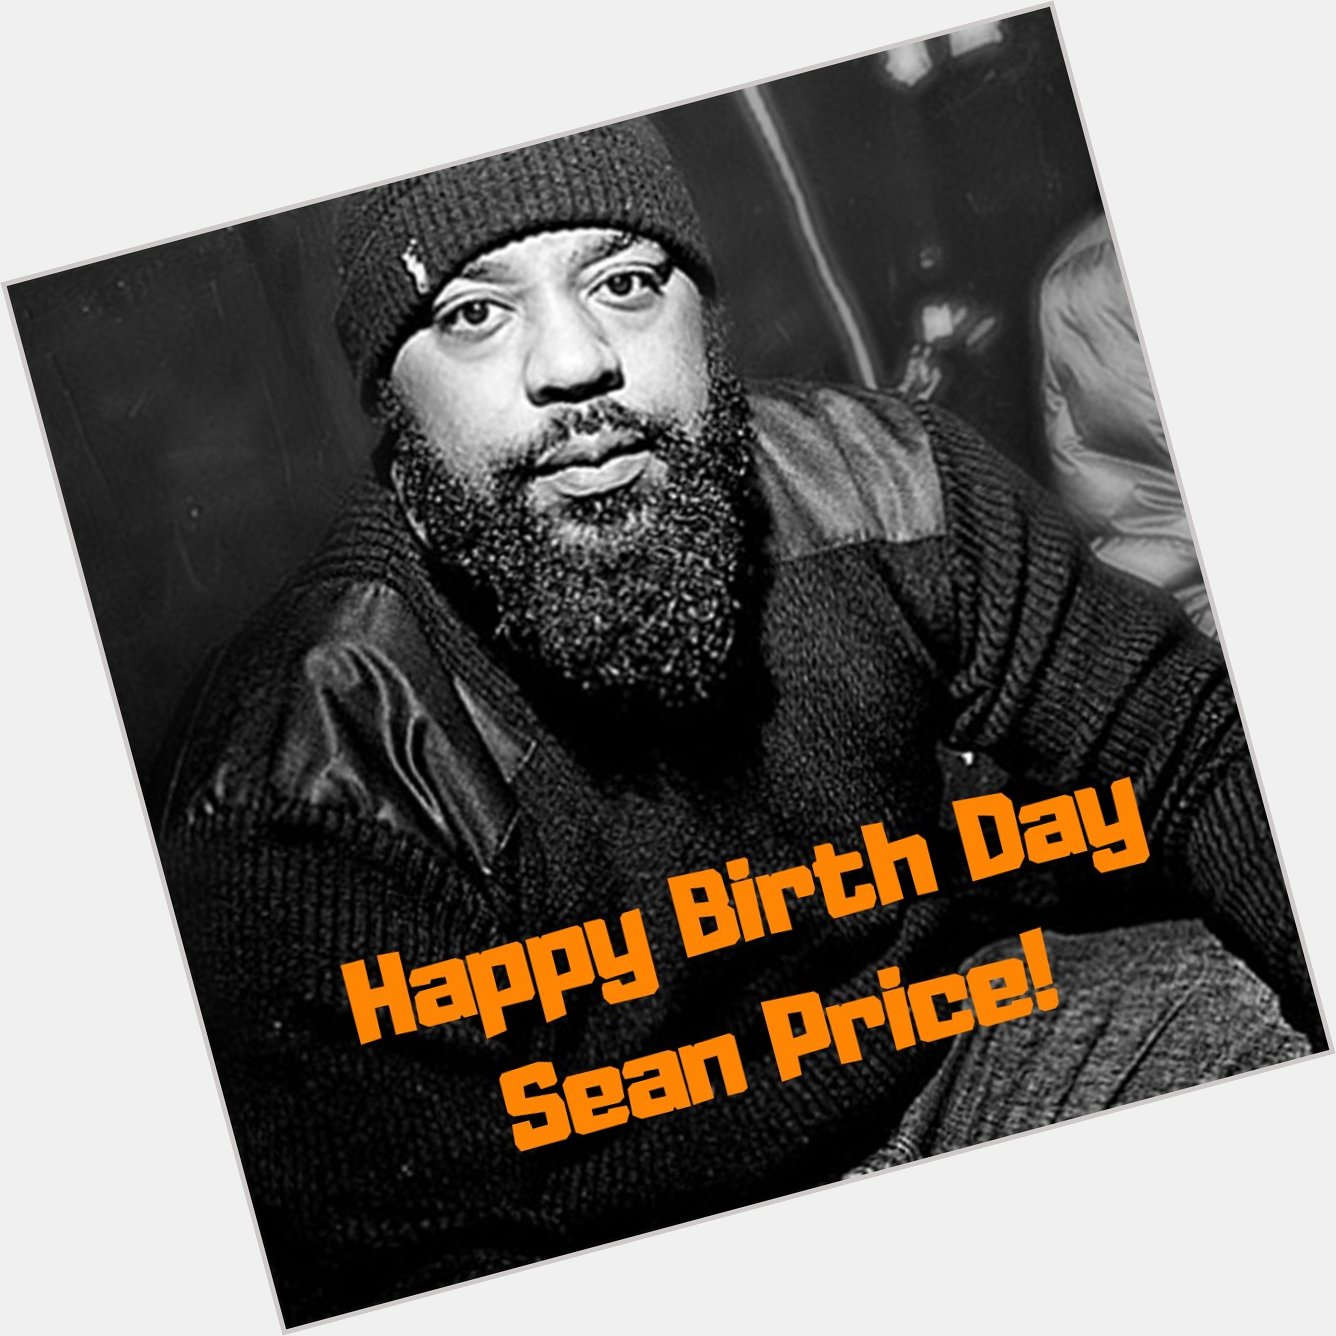 Happy Birthday Sean Price! Thank you for your contributions to Hip Hop artform! 